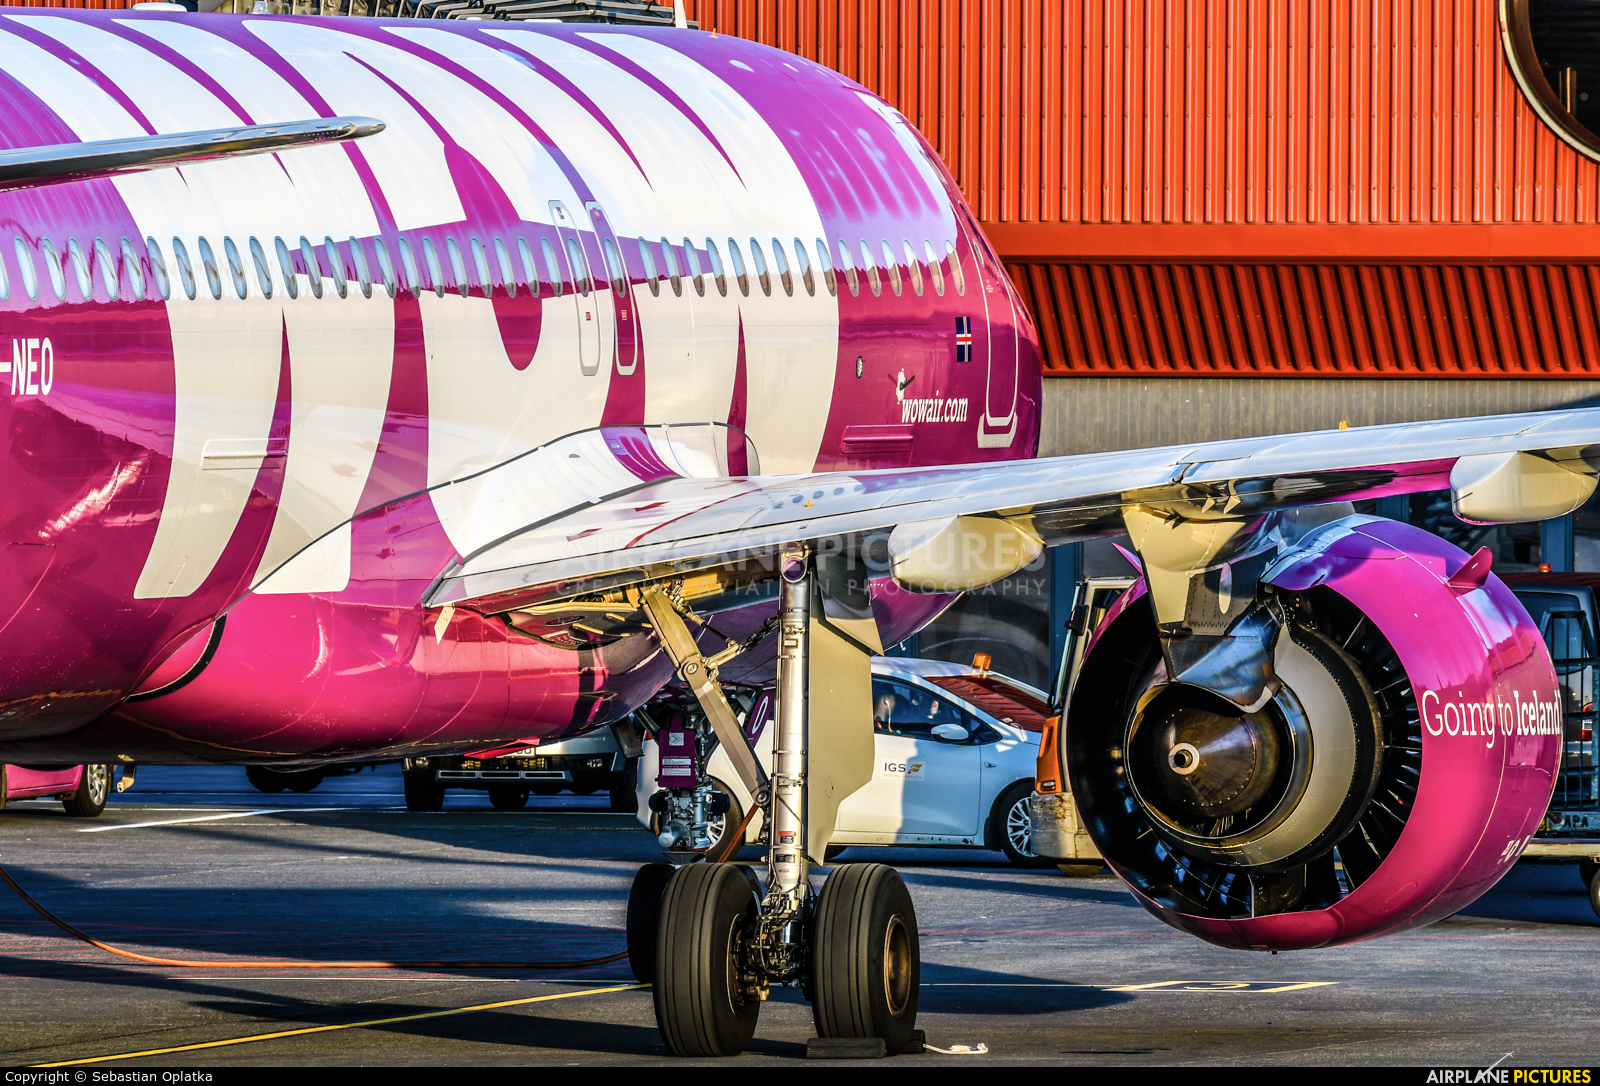 Details about   JFOX JFA320006 1/200 WOW AIR TF-NEO WITH STAND AIRBUS A320NEO REG 